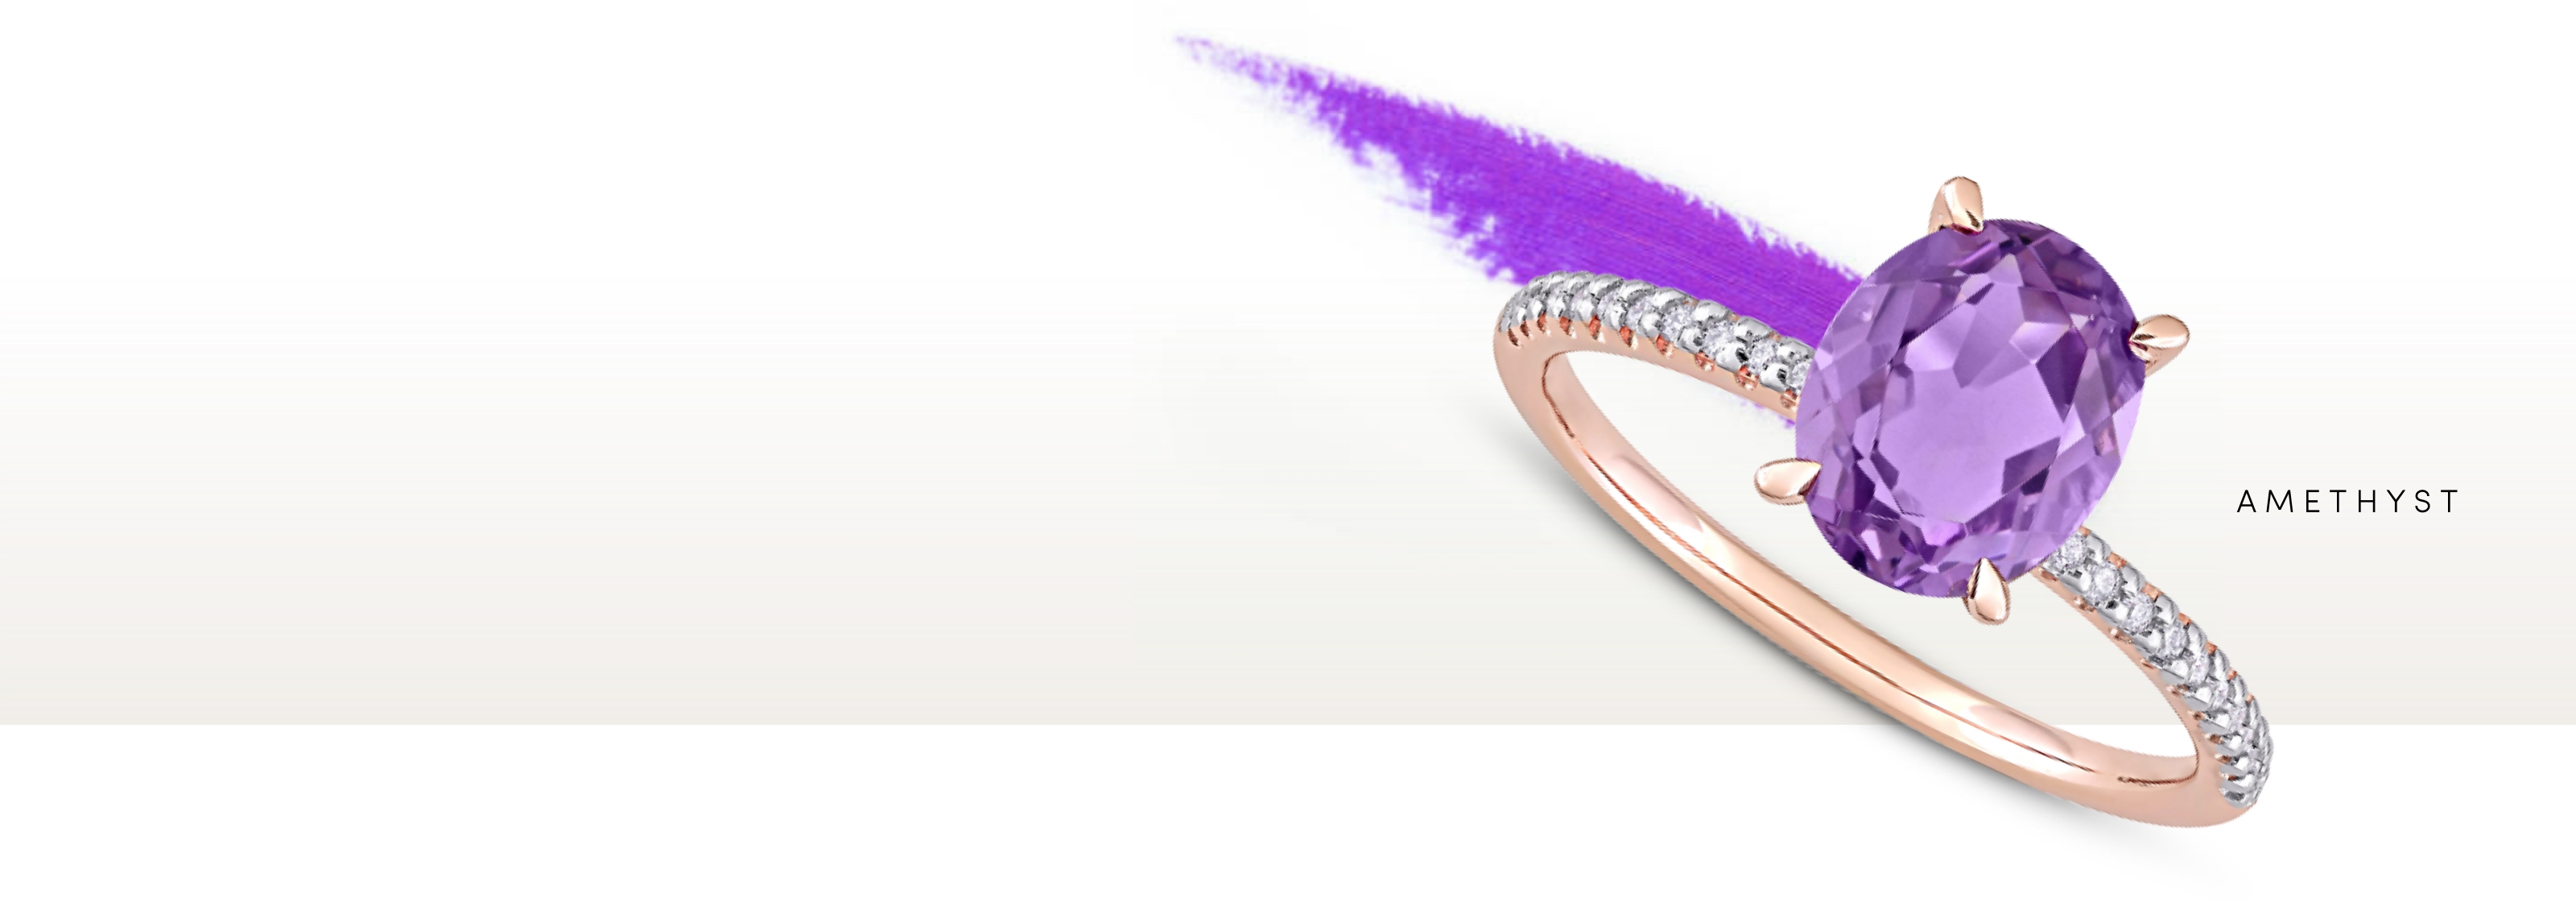 An amethyst ring with a diamond band on a white and purple background next to the word “Amethyst”.